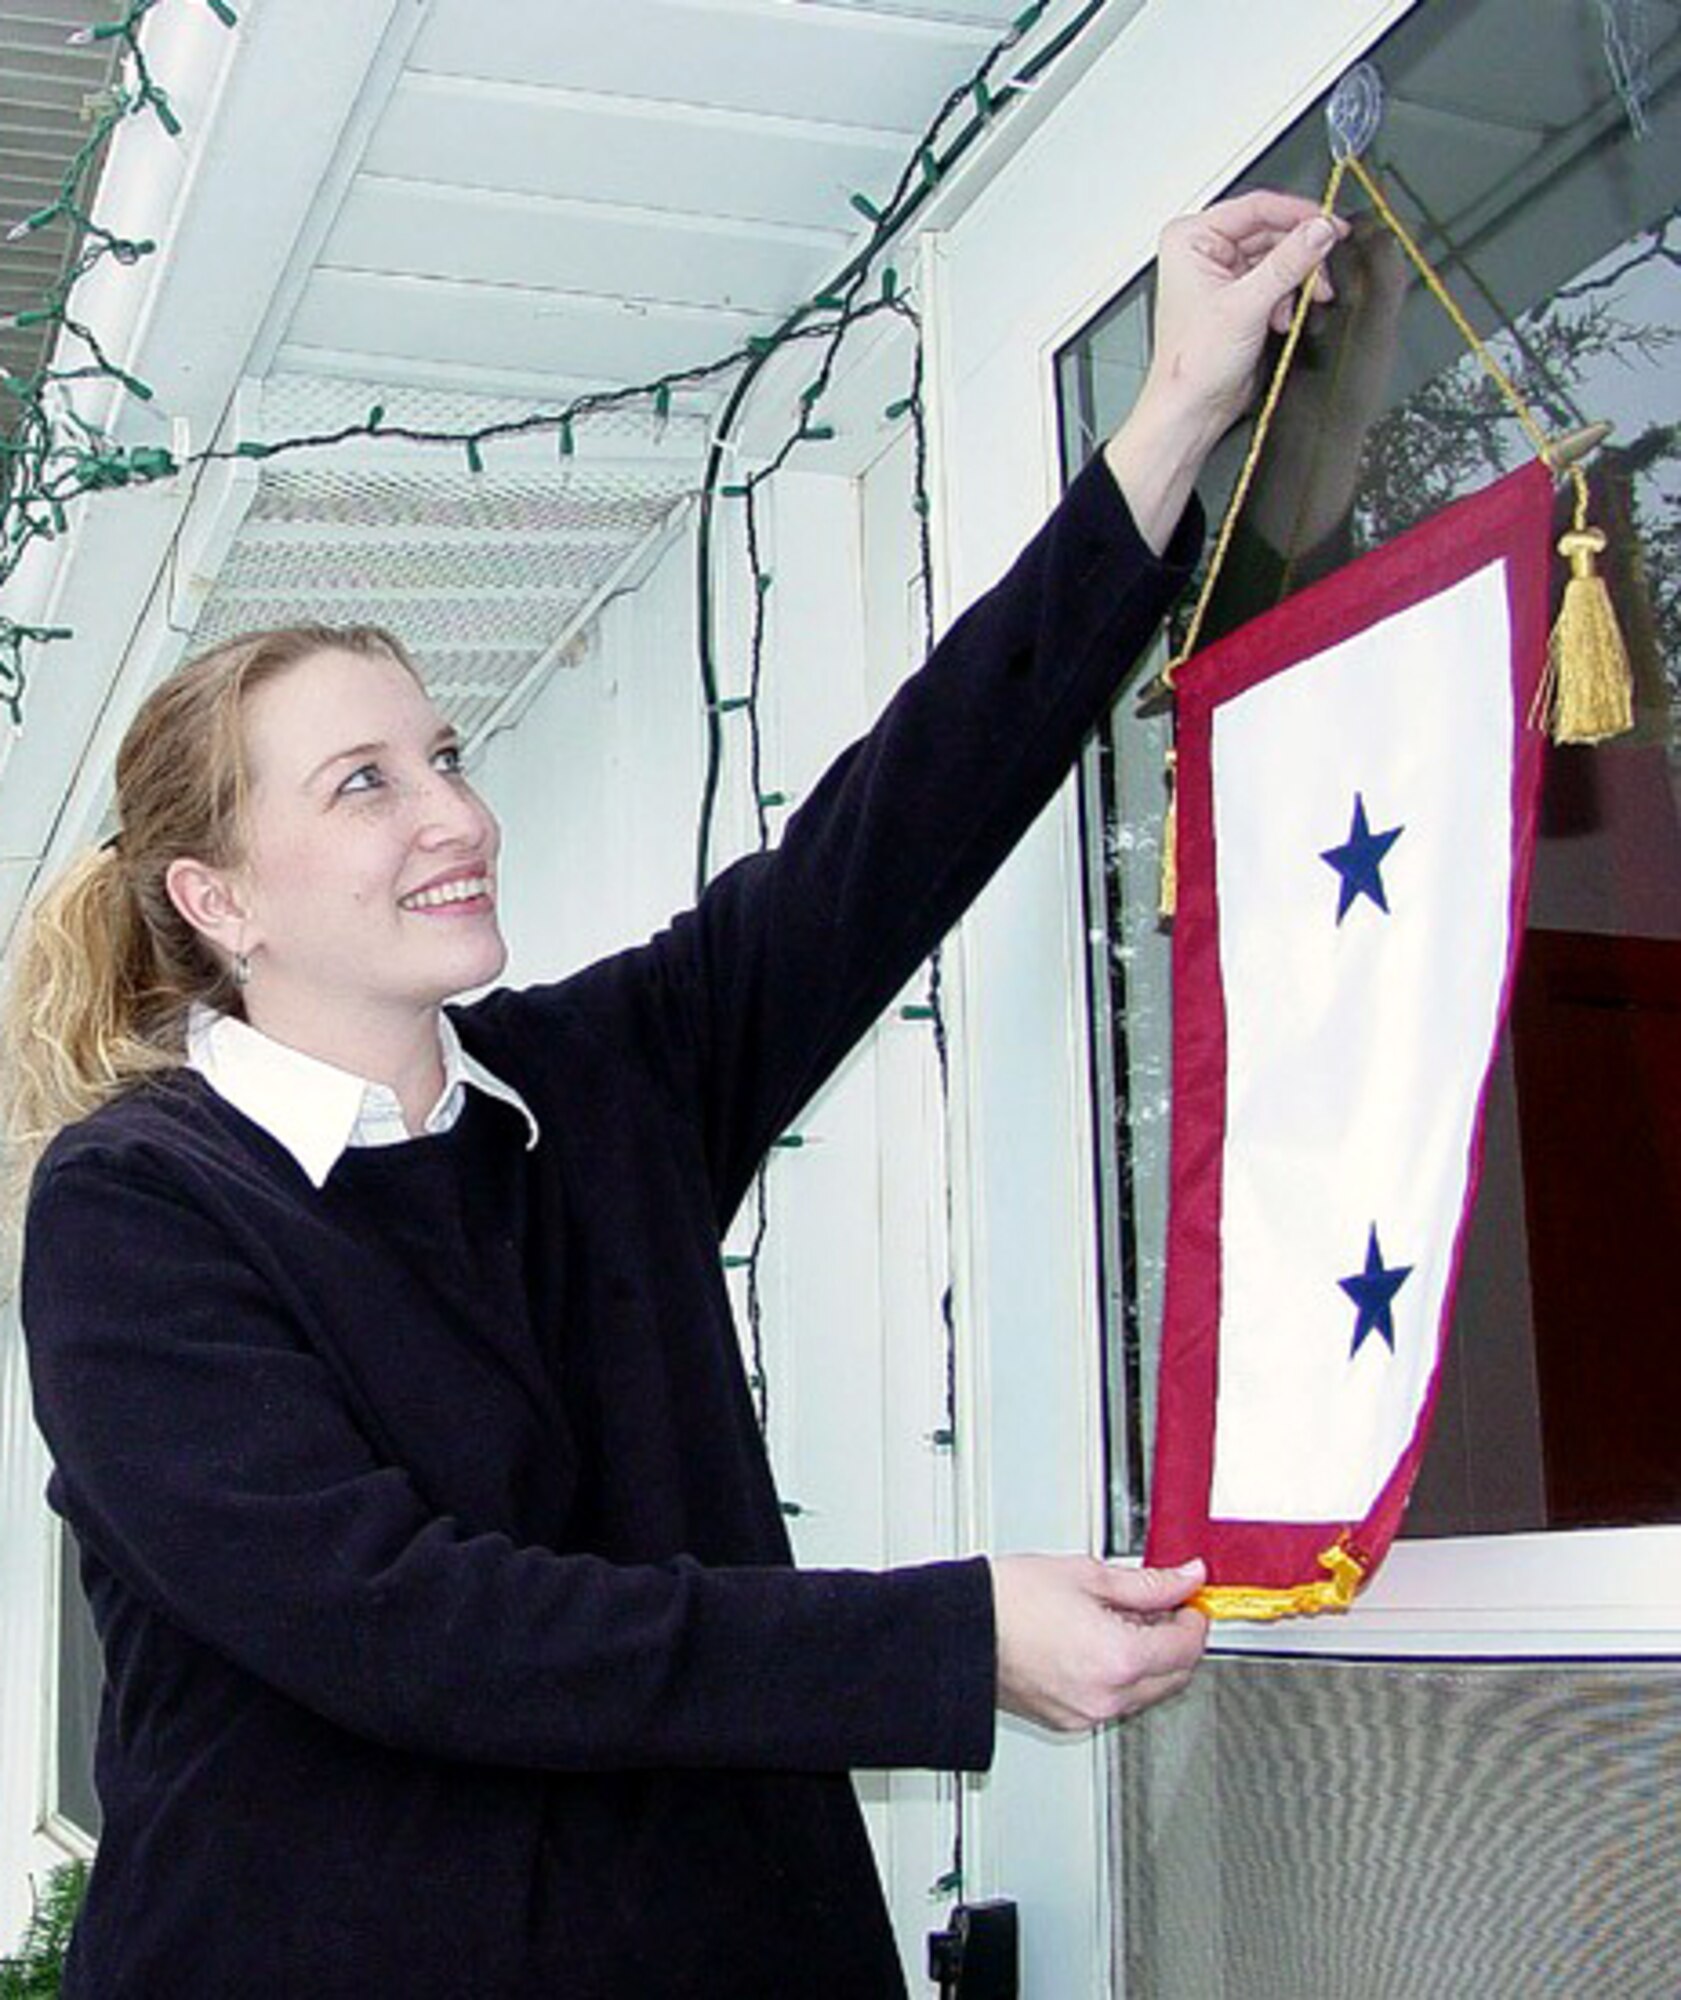 MINOT AIR FORCE BASE, N.D. -- Christa Wolfe, wife of 1st Lt. Marc Wolfe from the 741st Missile Squadron here, hangs a two-star service flag on her door. Christa's service flag honors her husband and her father, Lt. Col. Dennis McCarty, a chaplain at Little Rock Air Force Base, Ark. Service flags are hung during any period of war or hostilities in which the U.S. armed forces may be engaged. Each star represents a family member in the armed forces. (U.S. Air Force photo by Senior Airman Steve Grever)